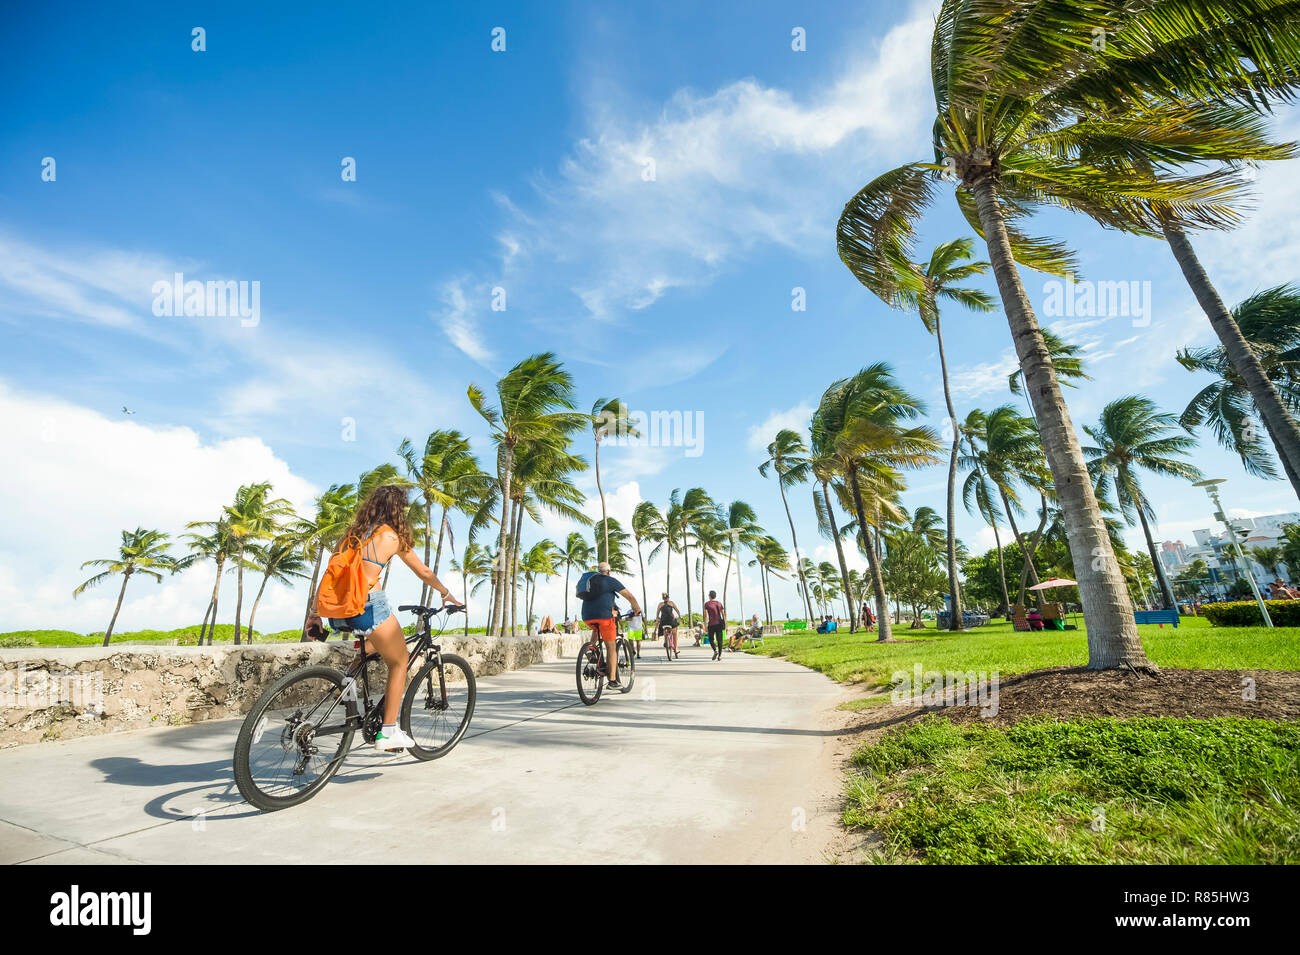 MIAMI - SEPTEMBER, 2018: Visitors and locals ride bicycles along the beachfront promenade in Lummus Park adjacent to historic Ocean Drive. Stock Photo